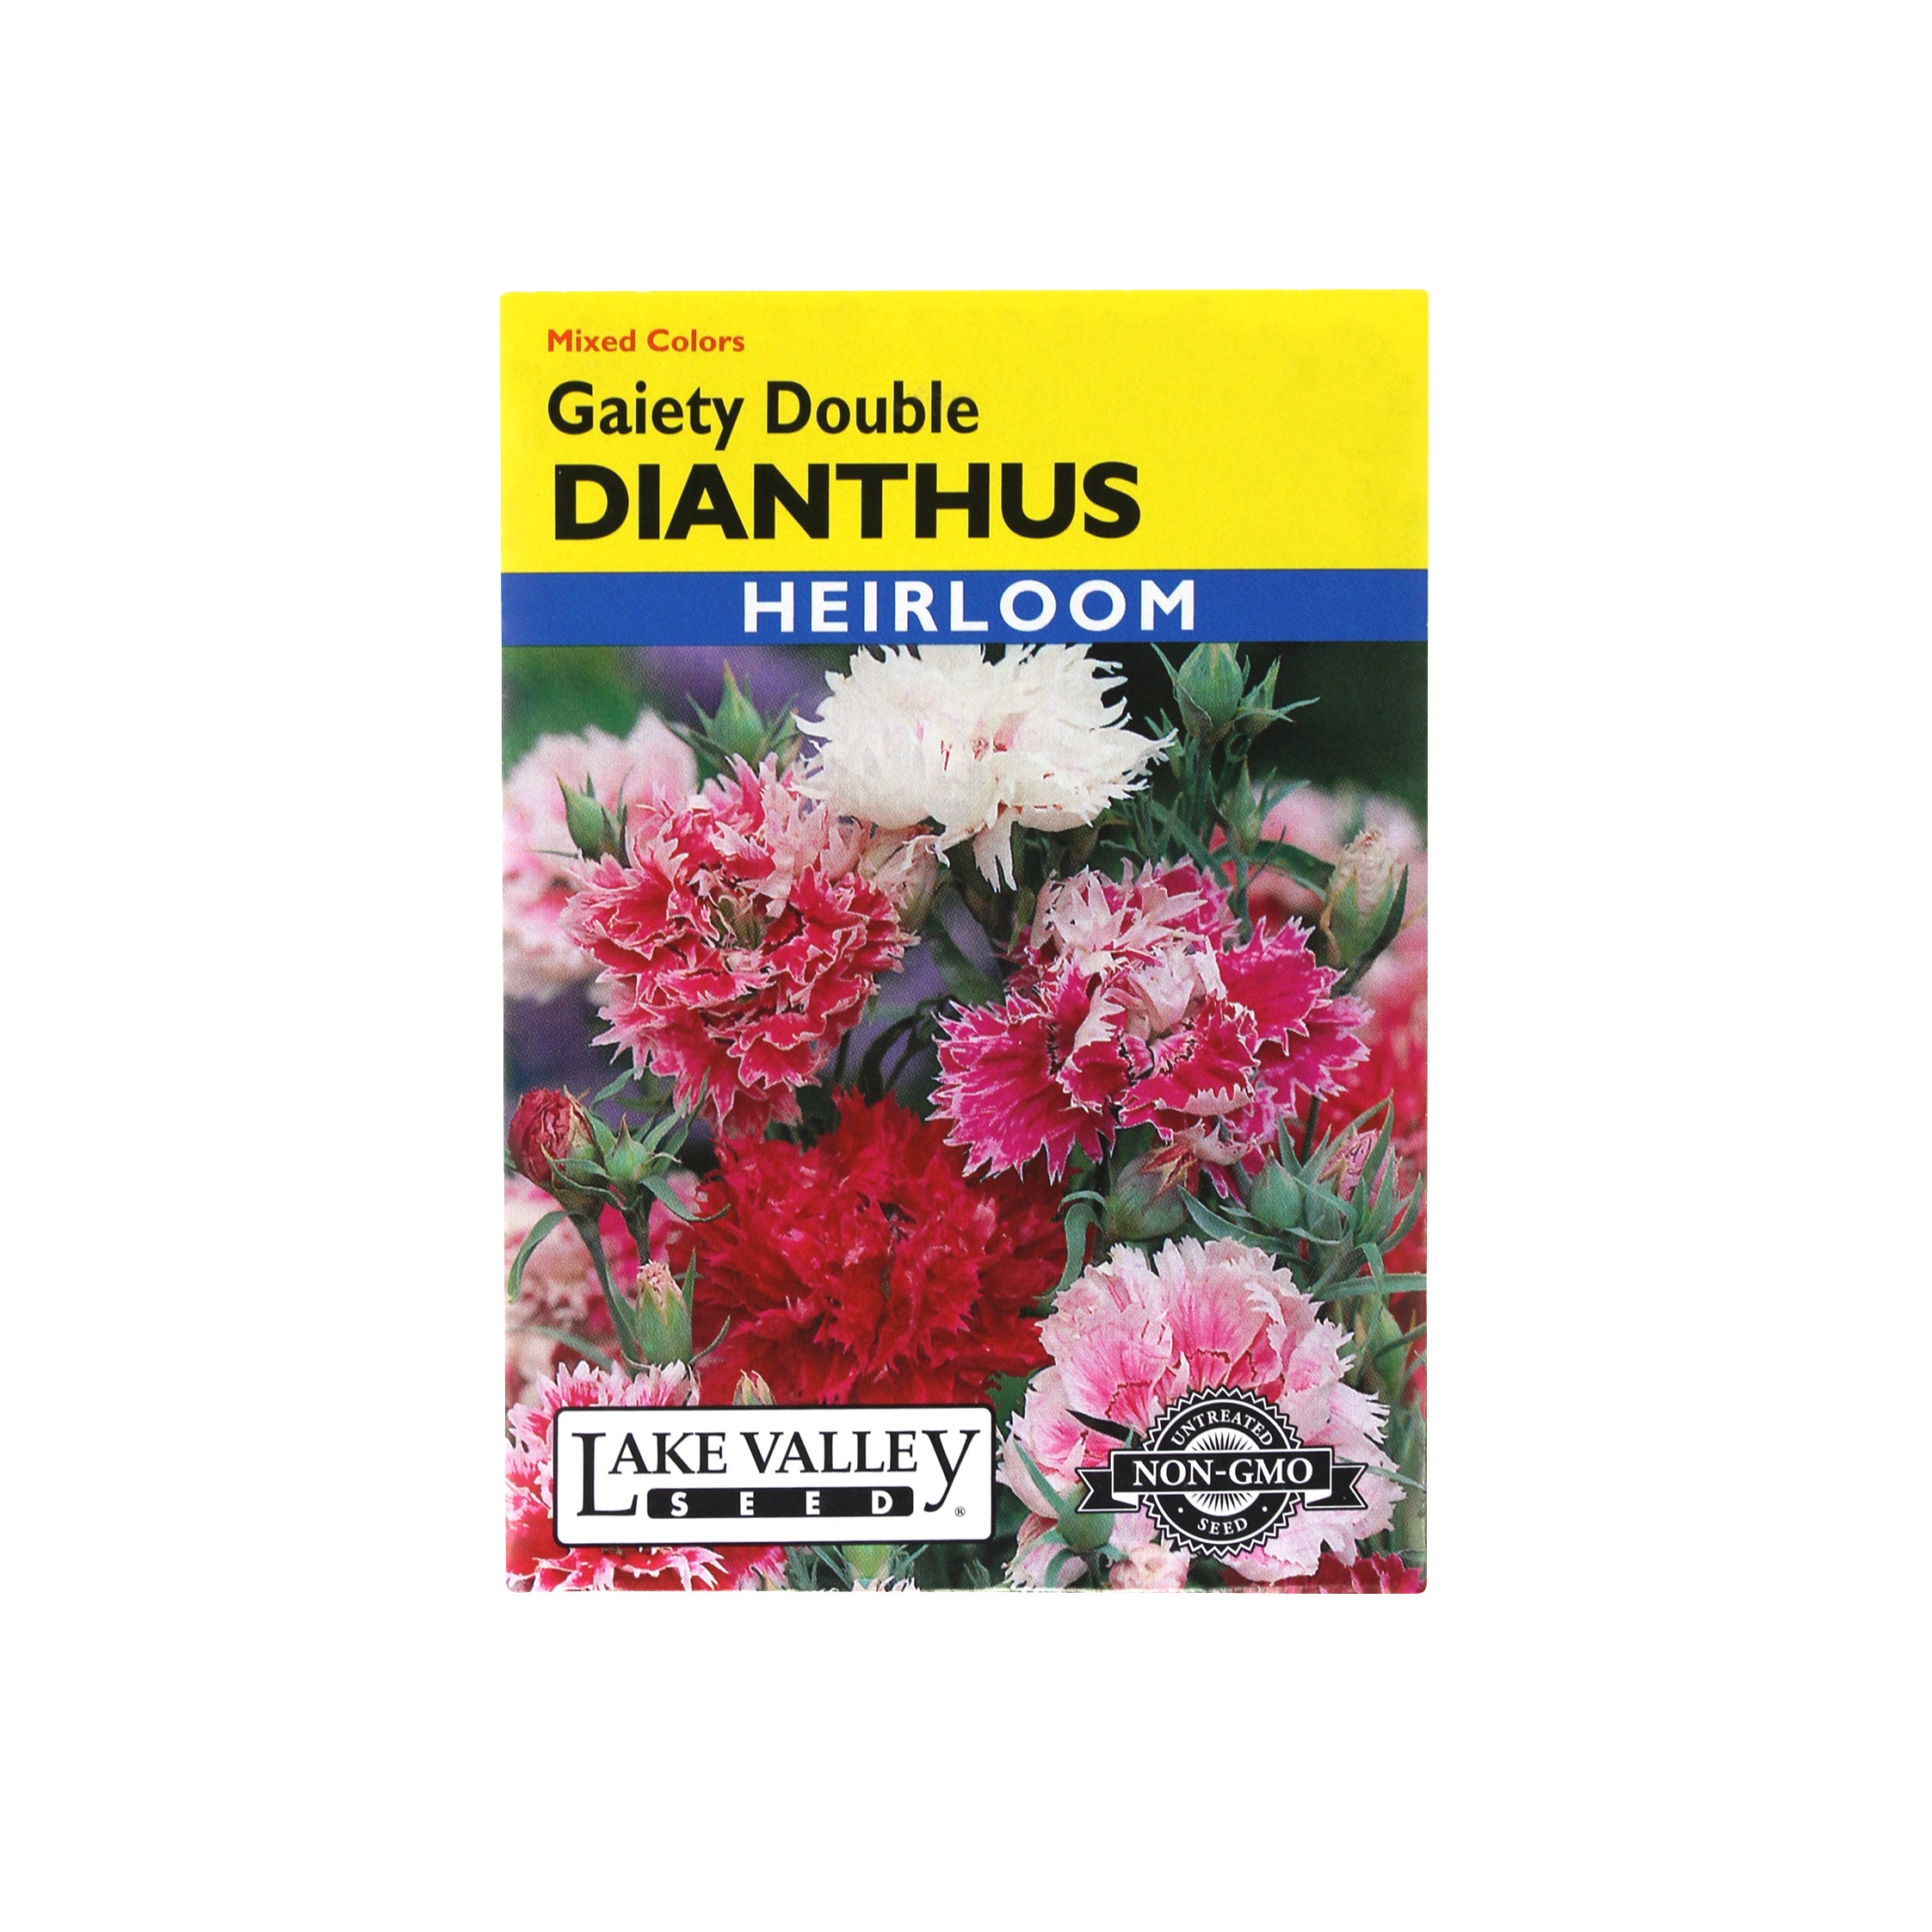 Lake Valley Seed Dianthus, Gaiety Double Heirloom Mix, 0.5g